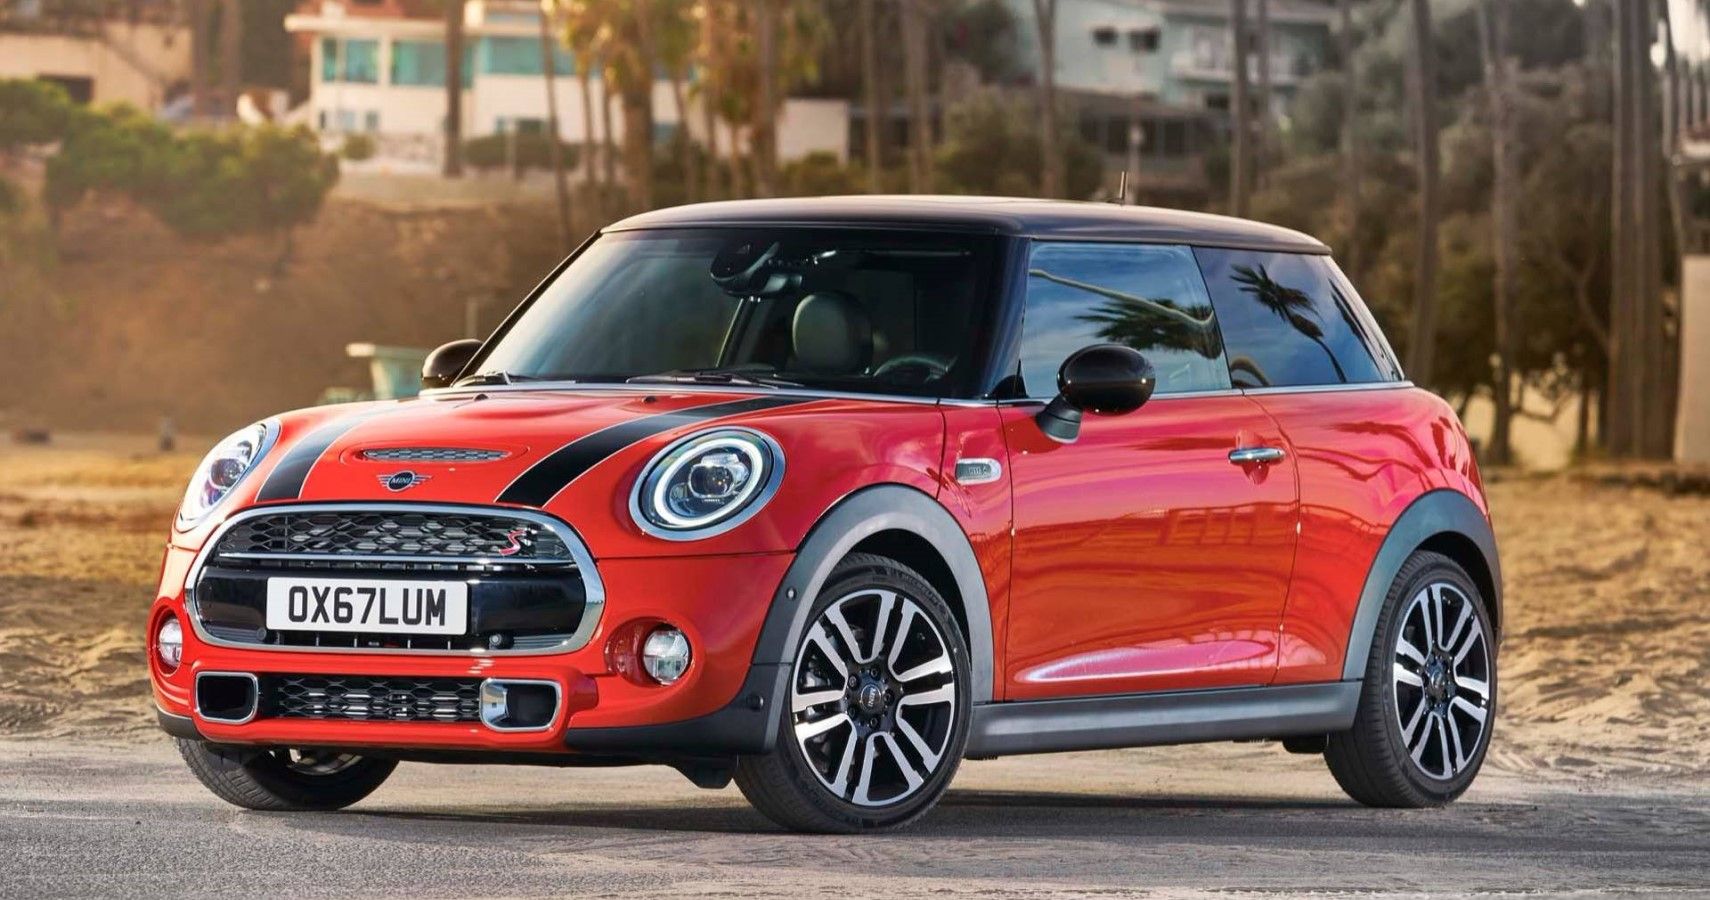 10-things-you-didn-t-know-about-the-mini-cooper